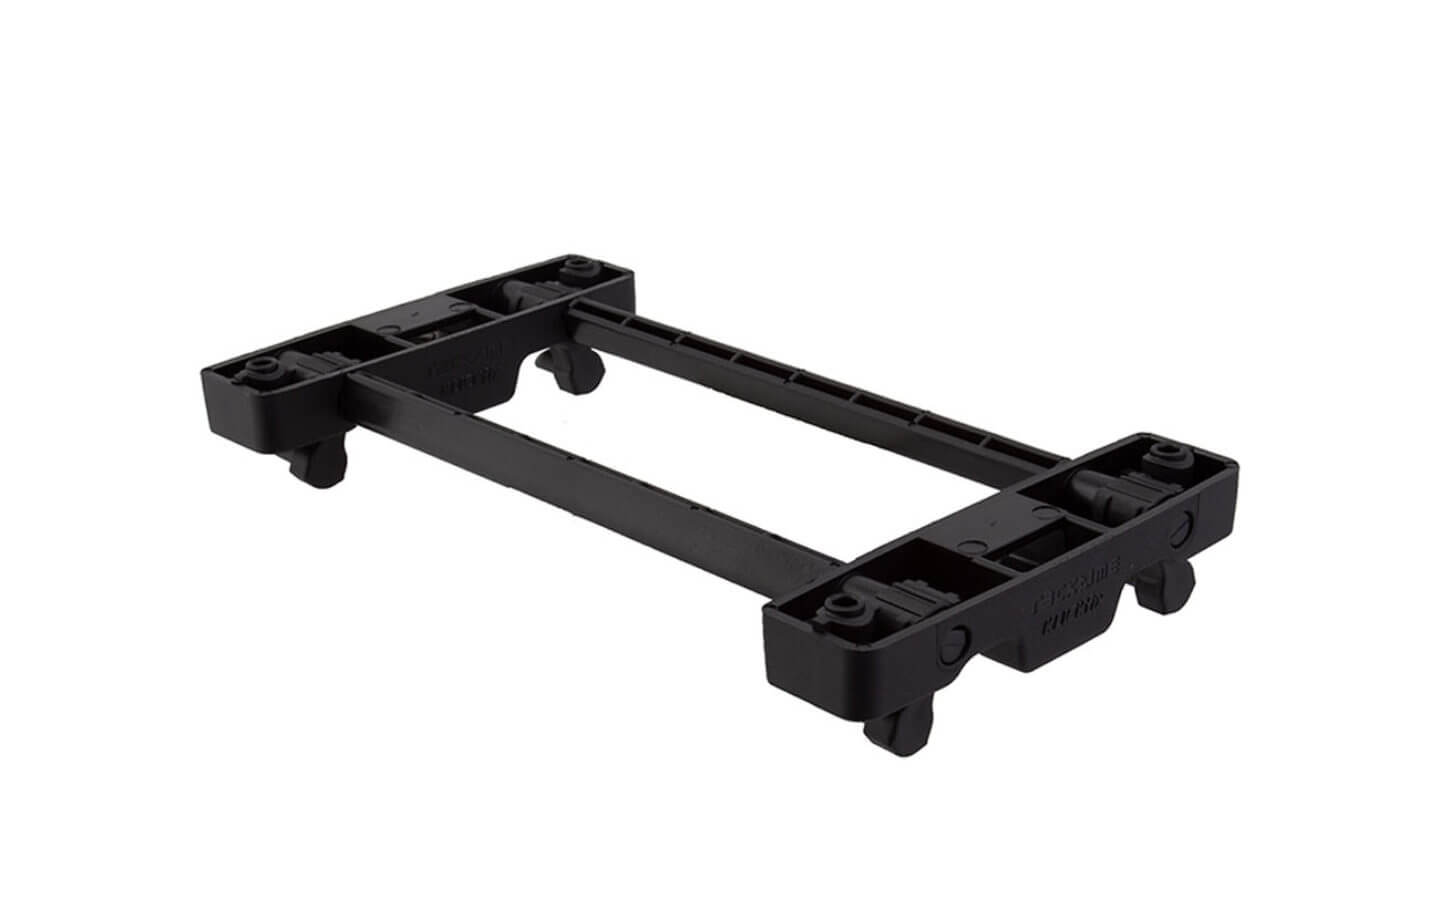 Racktime Plate Snapit Adapter for sale - Propel E-Bikes